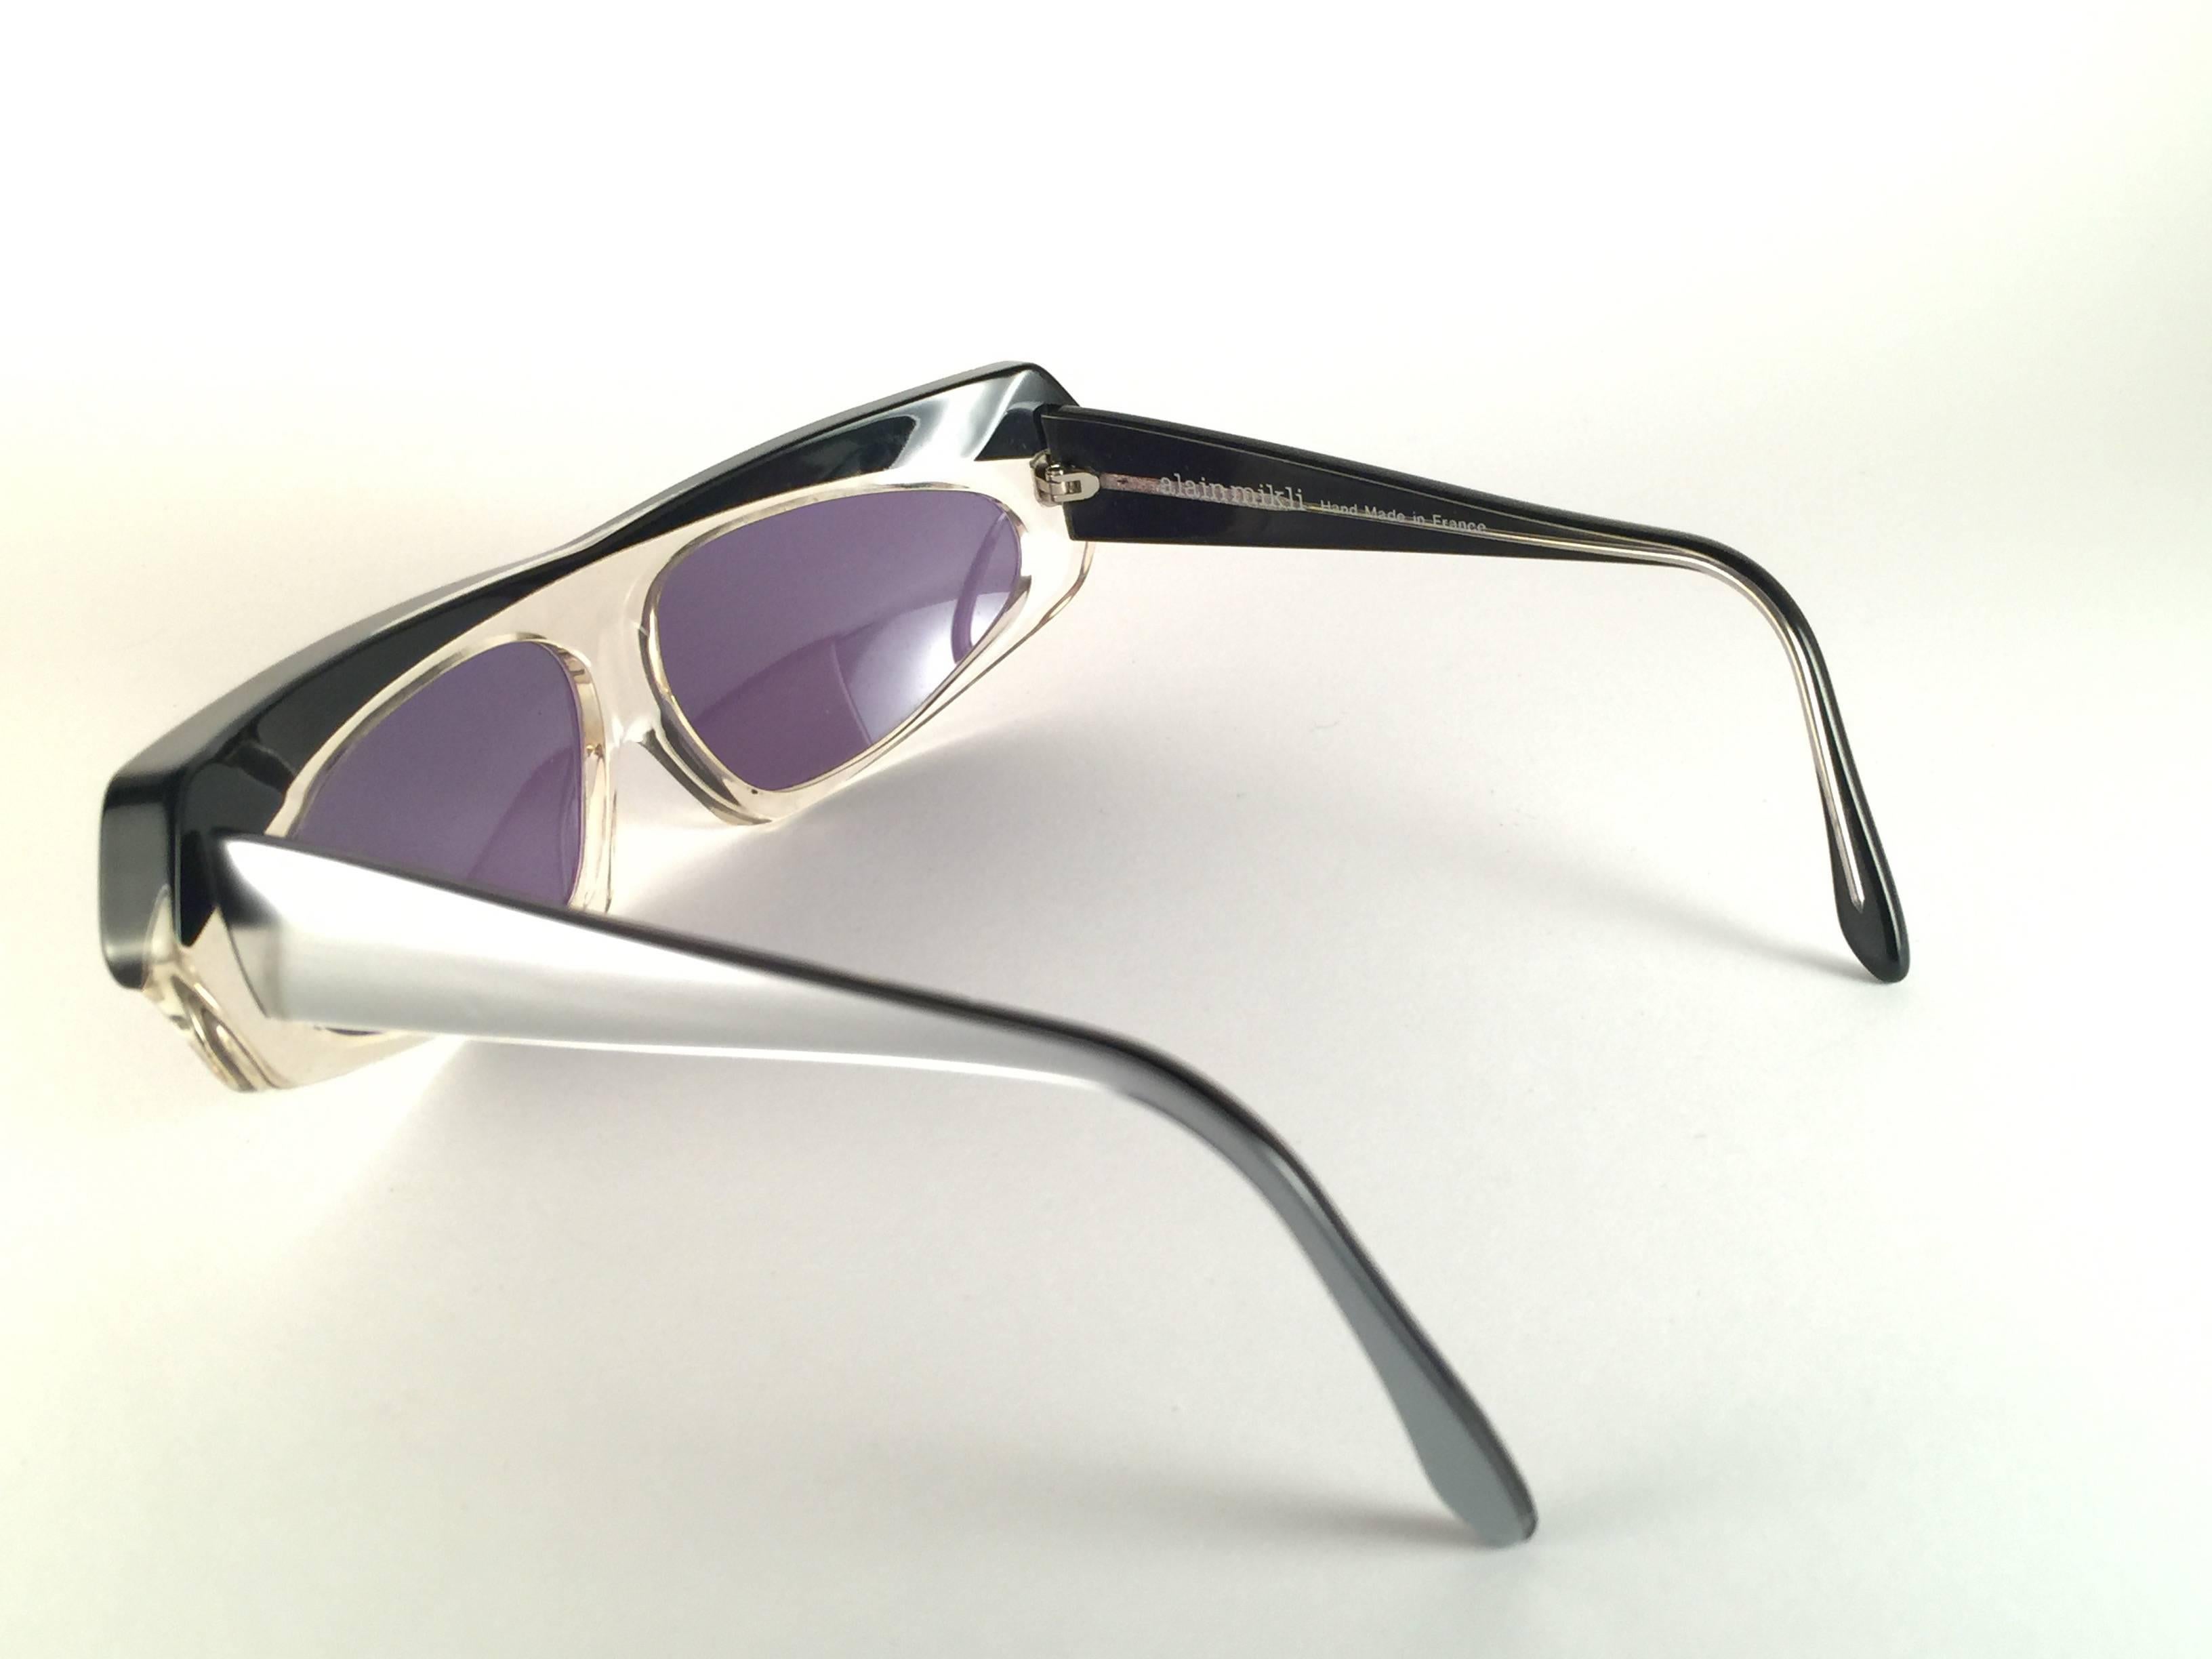 New Vintage Alain Mikli Black Silver & Clear Made in France Sunglasses 1980's 1